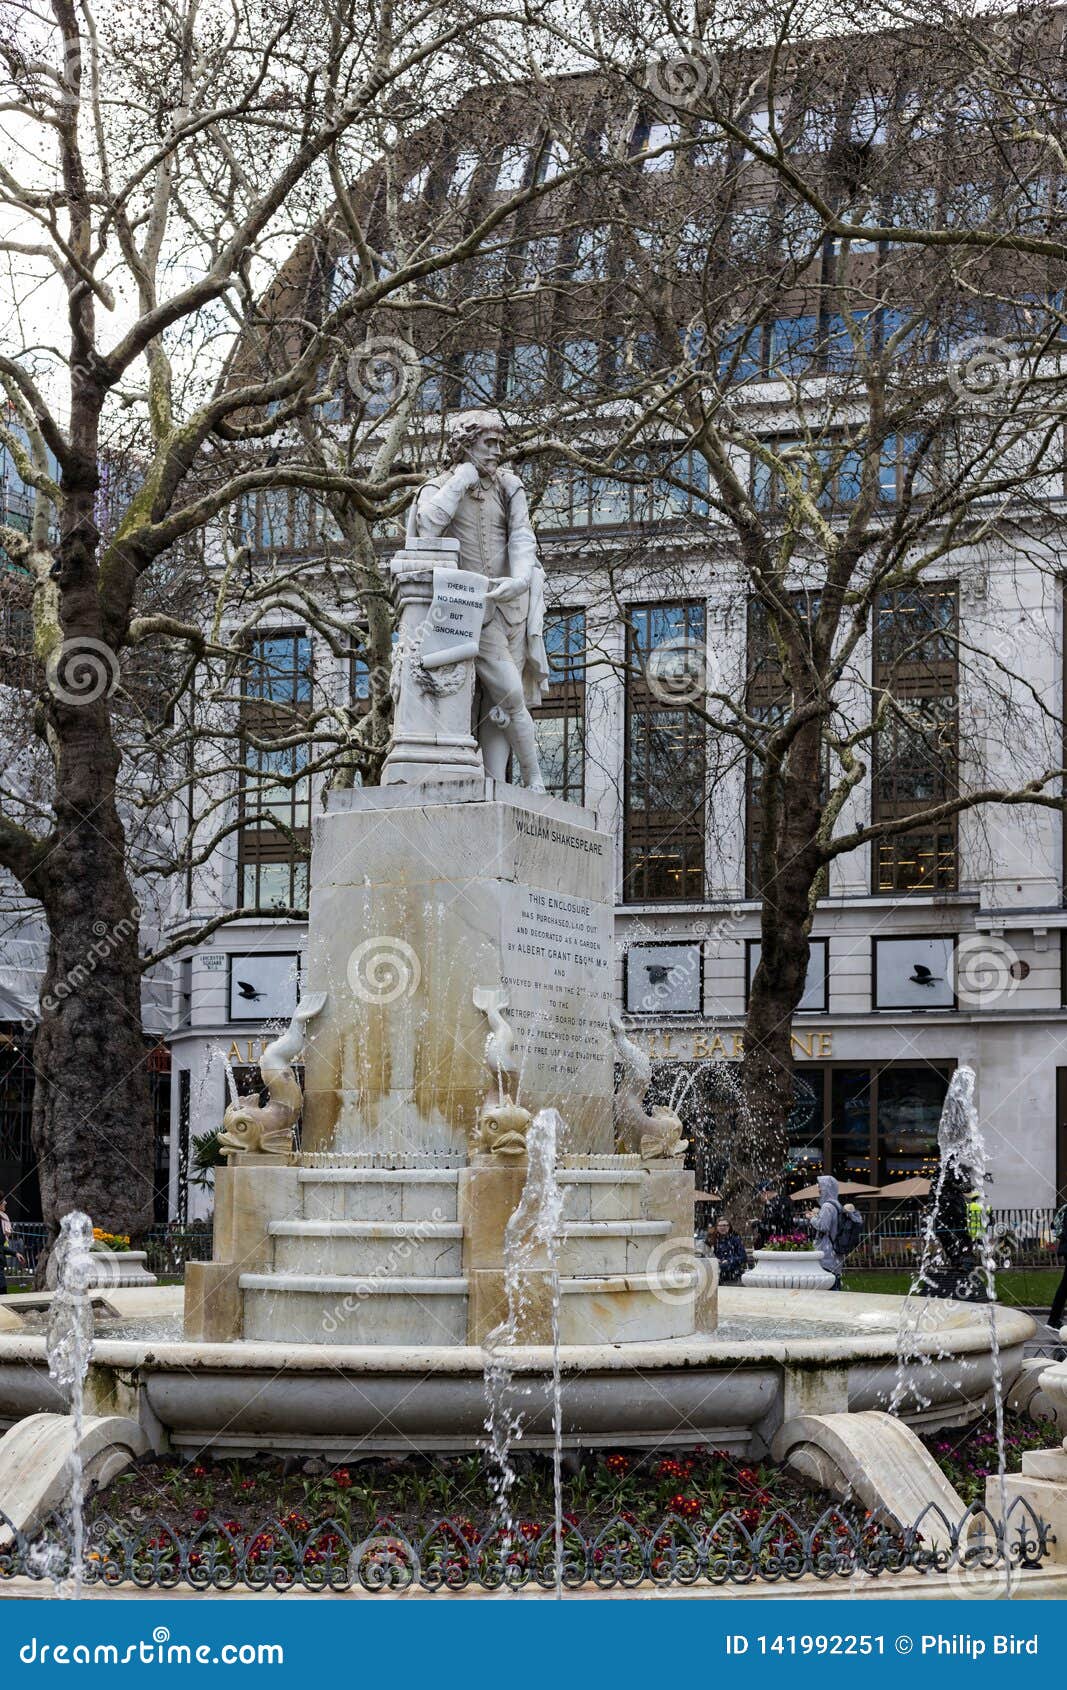 Statue of Shakespeare in Leicester Square London on March 11, 2019 ...